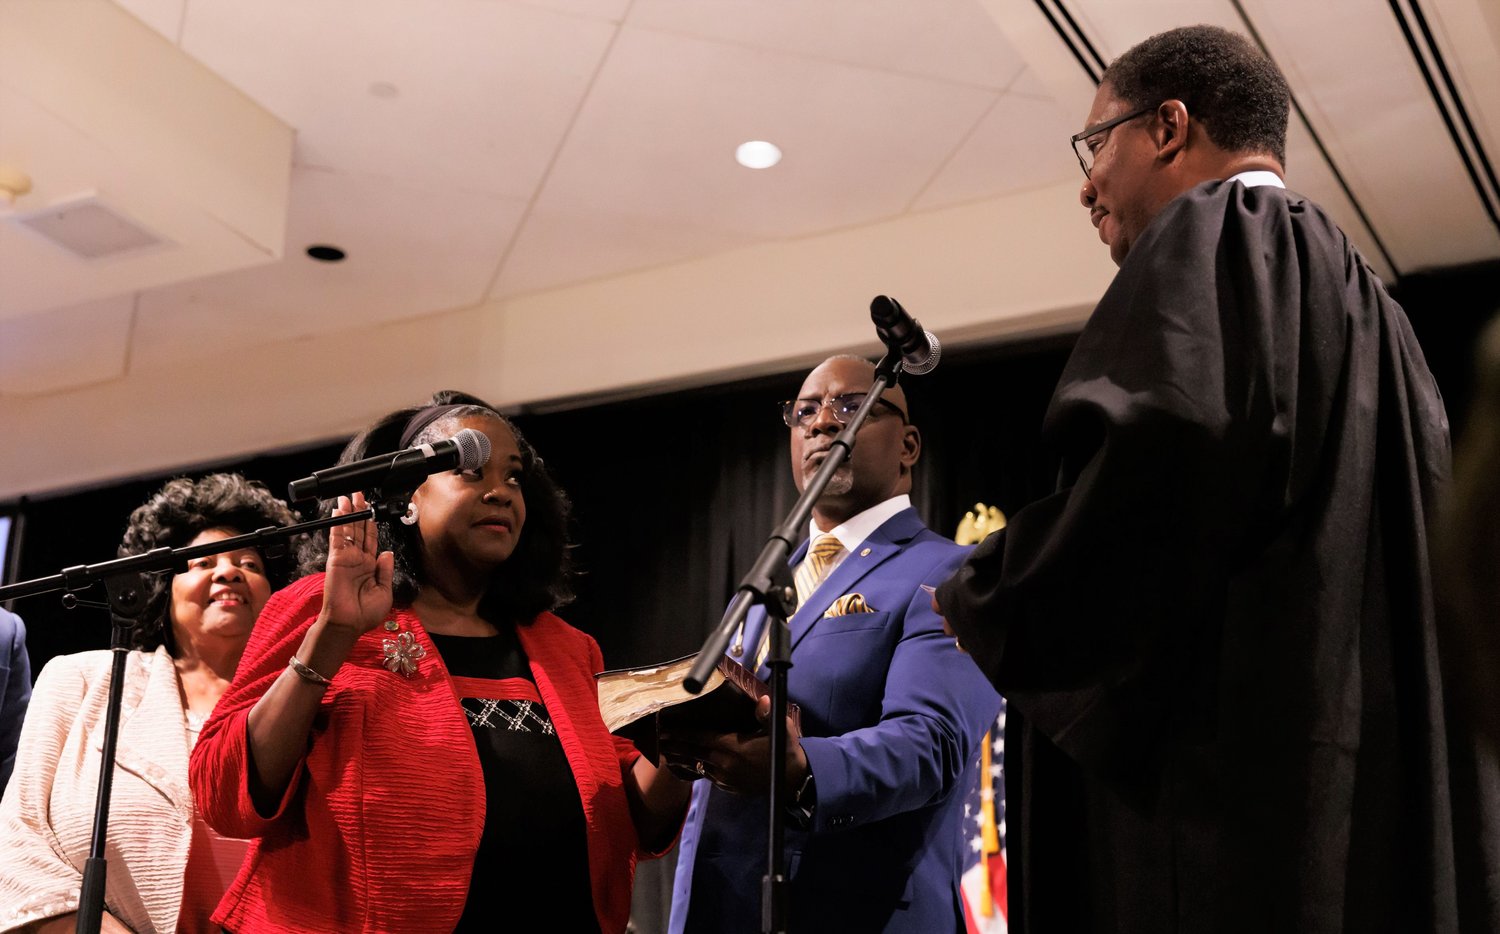 District Court Judge Stephen C. Stokes administers the oath of office to Veronica Jones as a new member of the Cumberland County Board of Commissioners on Monday night.